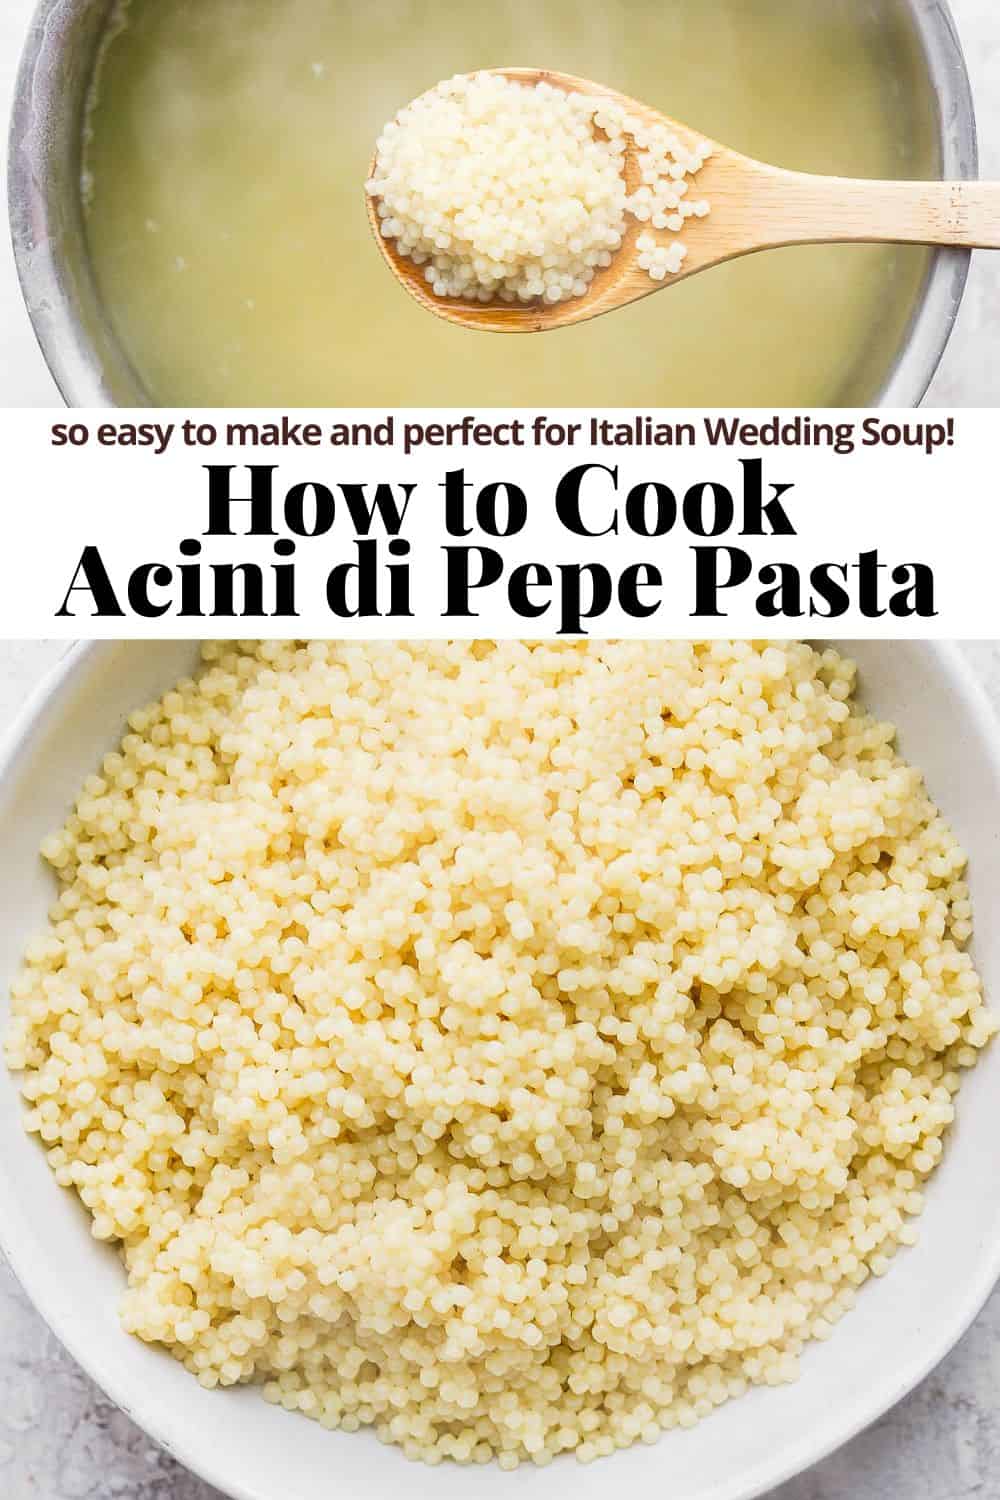 Pinterest image showing a wooden spoon scooping acini di pepe out of a sauce pan, the recipe title, and a bowl of fully cooked acini di pepe at the bottom.